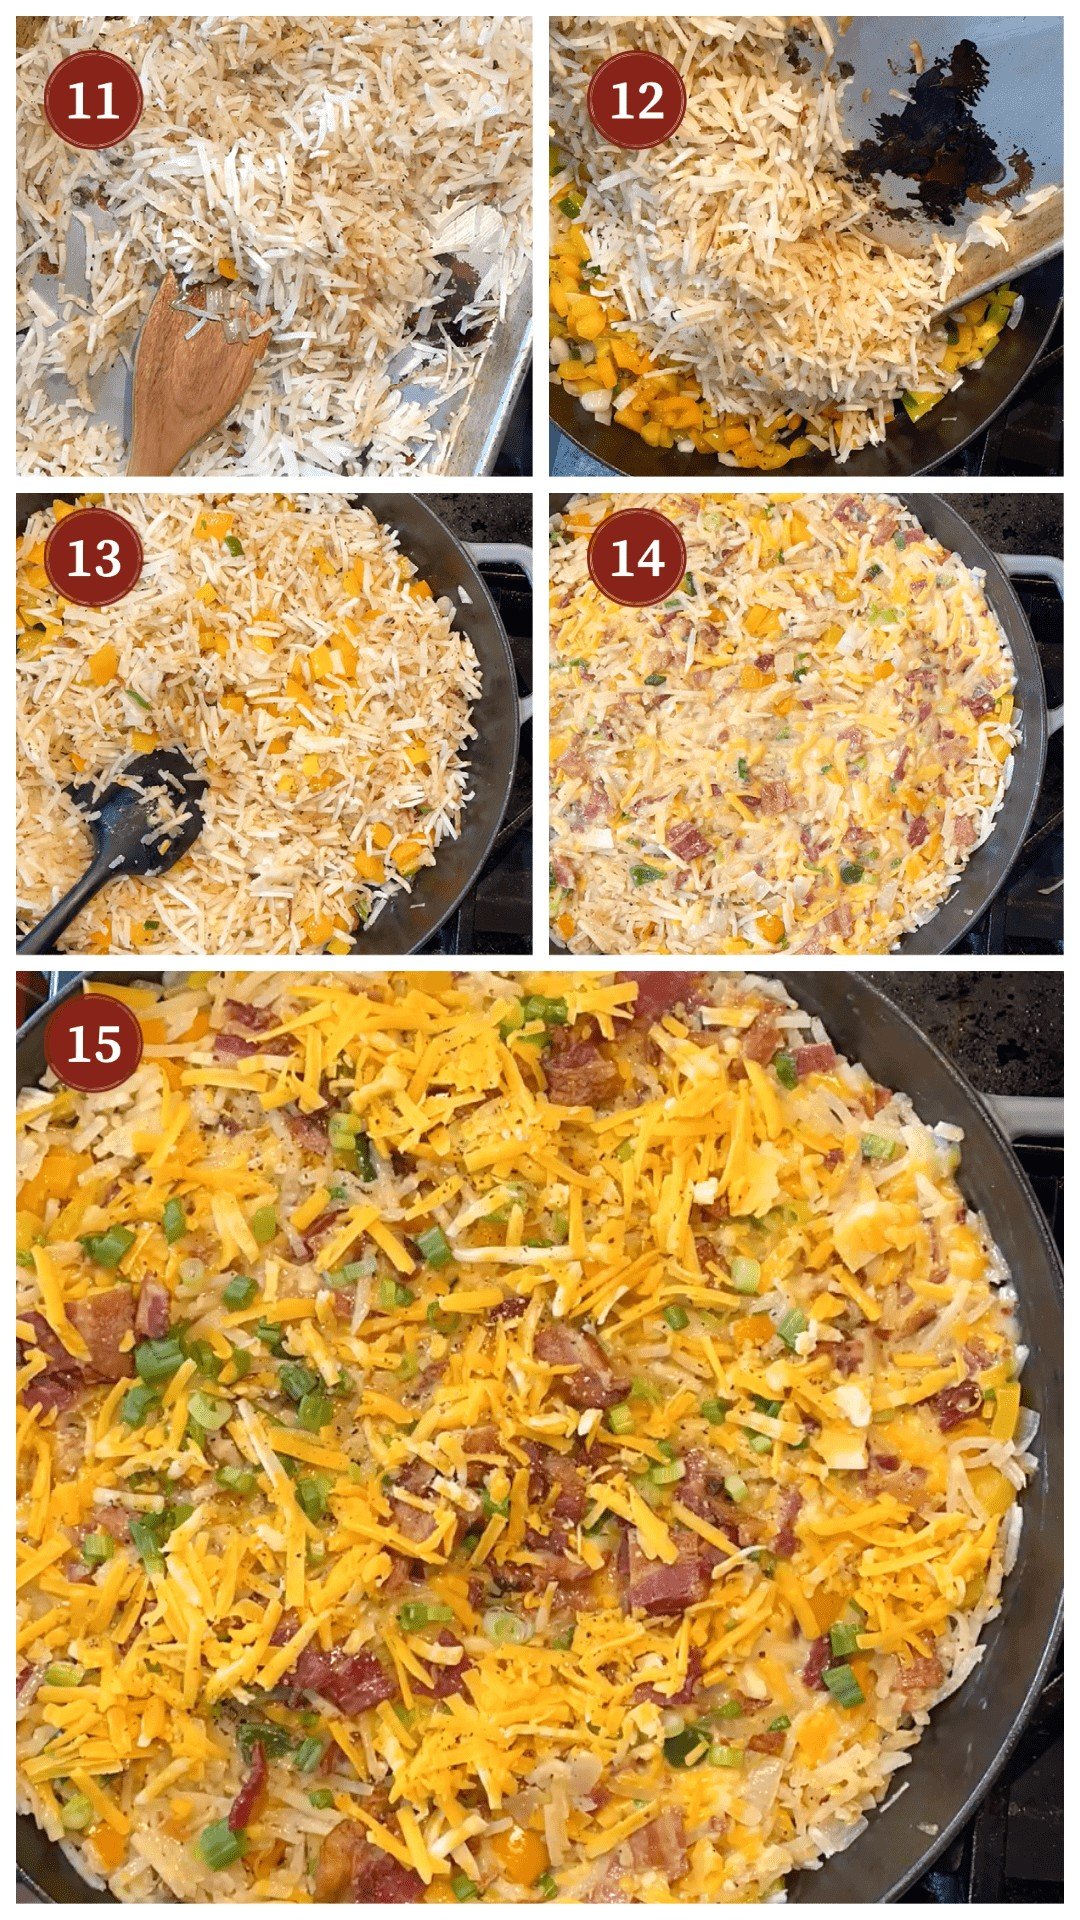 A collage of images showing the process of making hash brown casserole, steps 11 - 15.